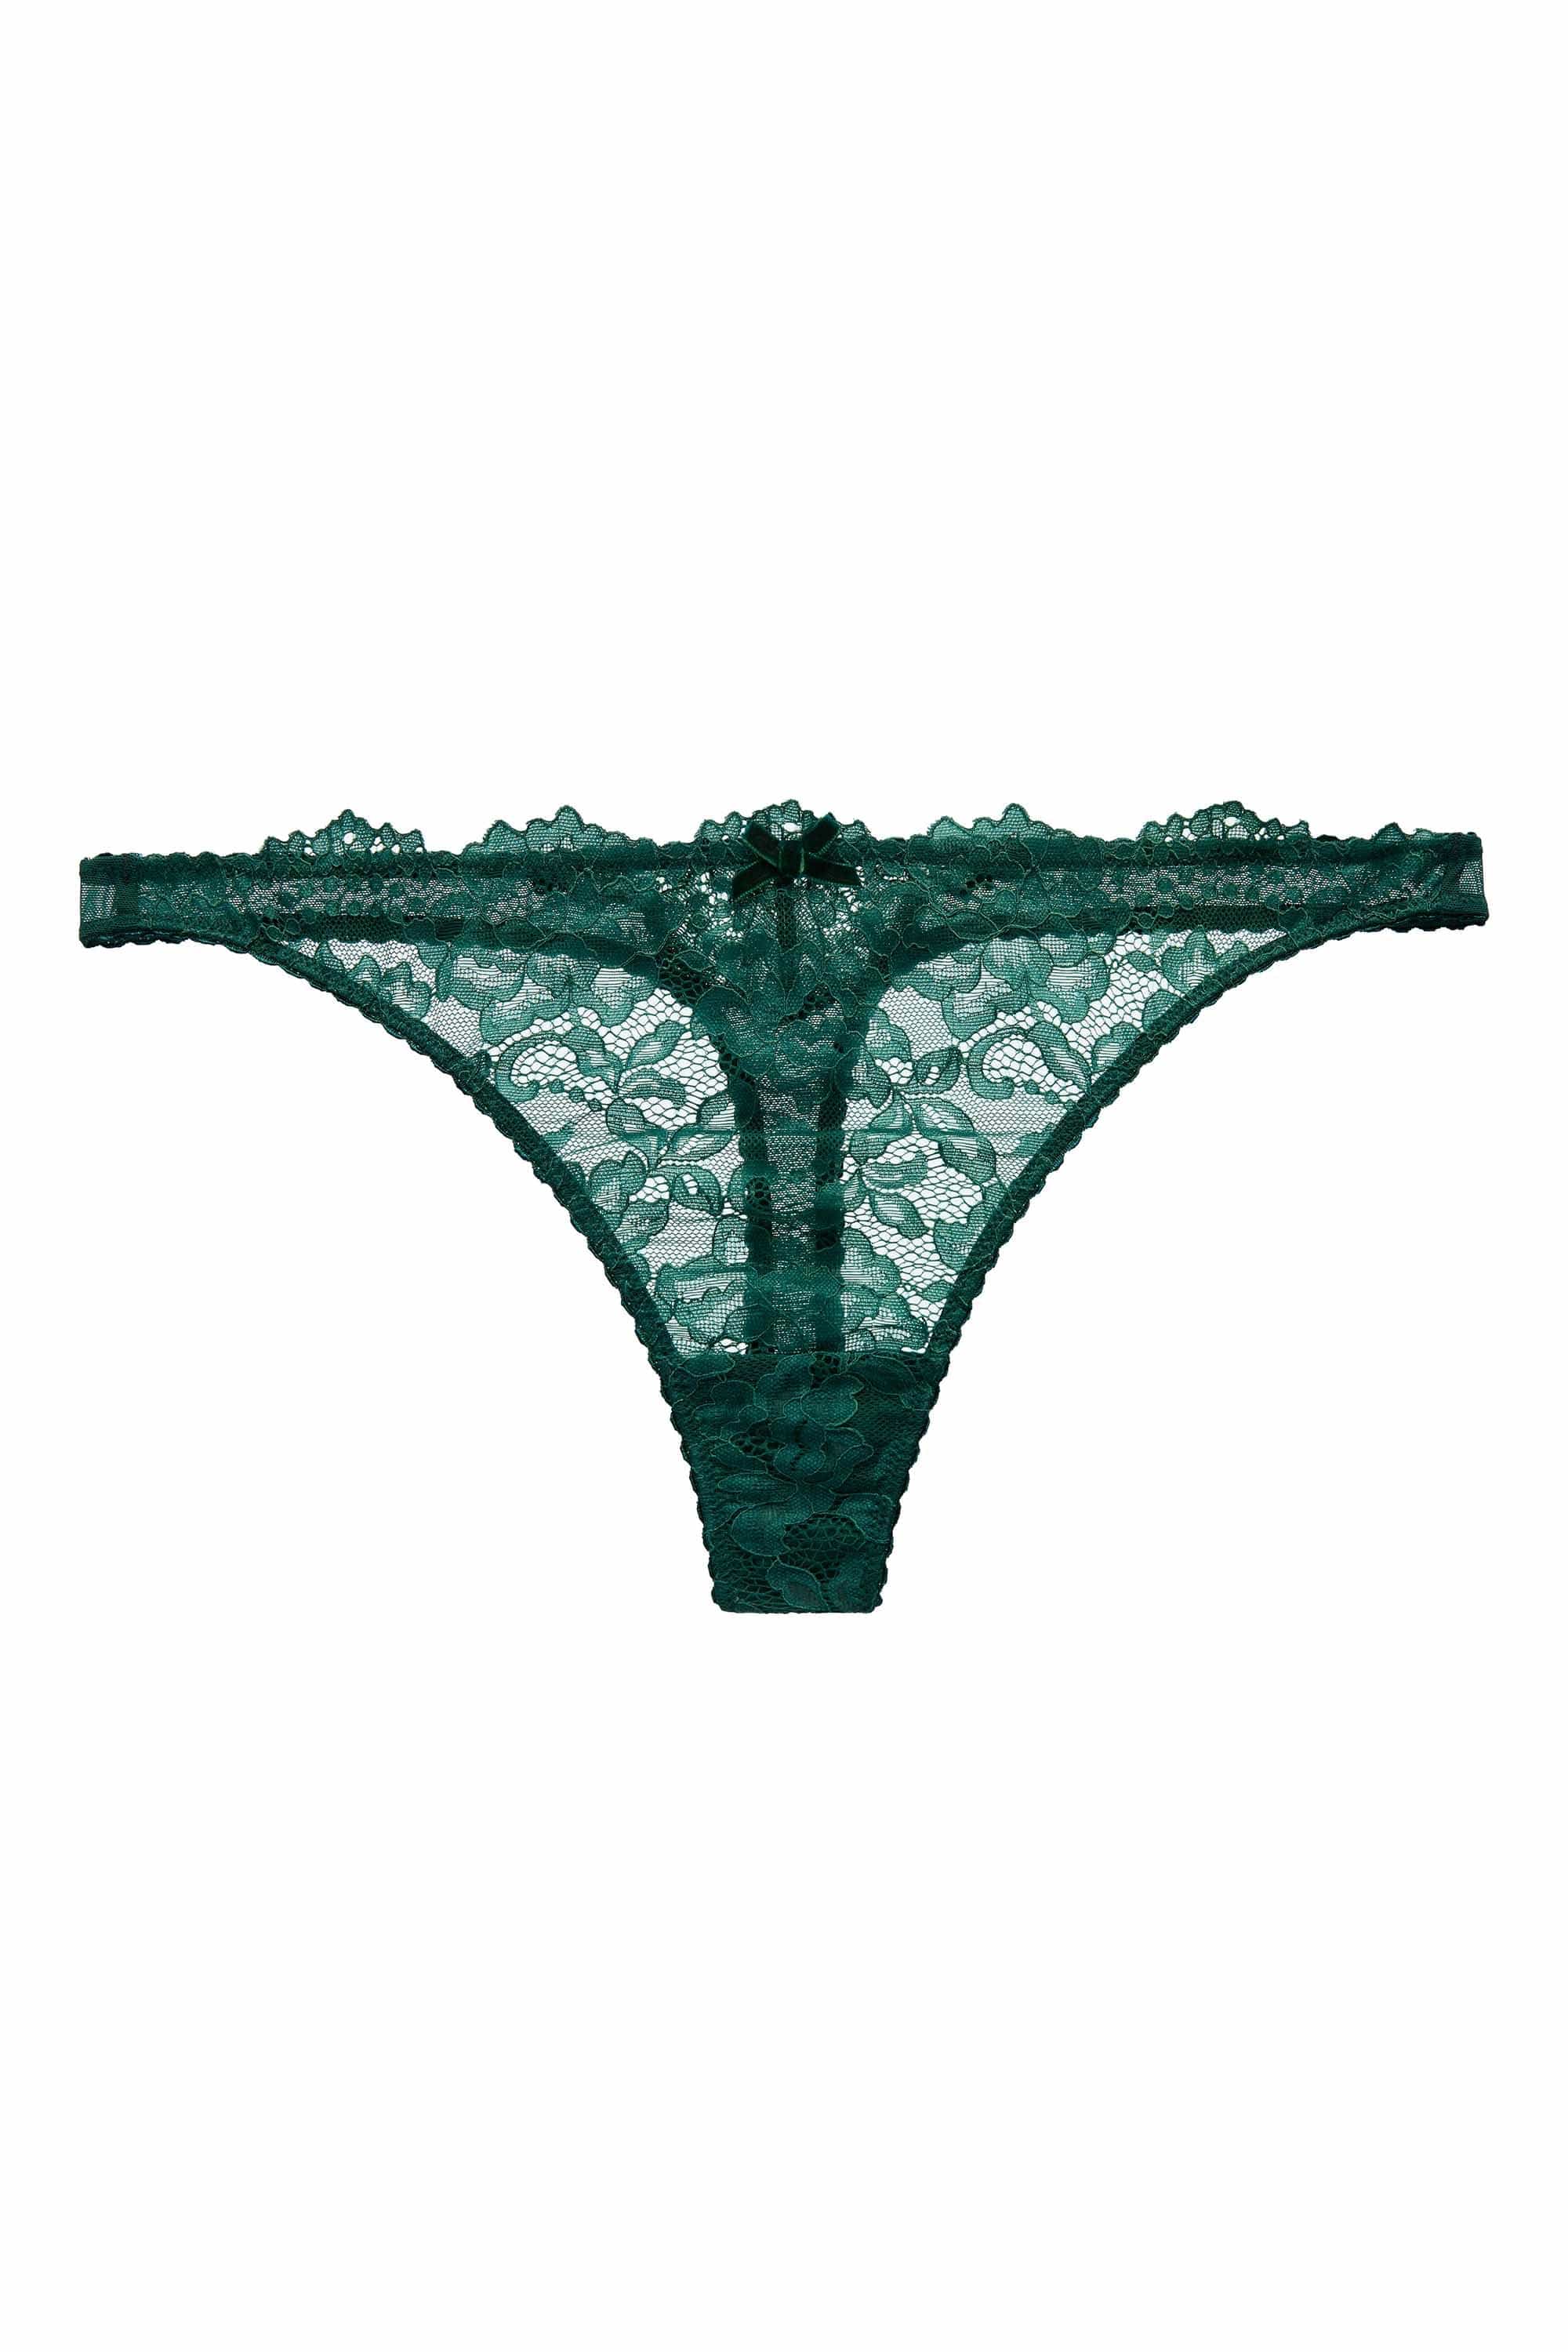 Cora Green Lace G-String